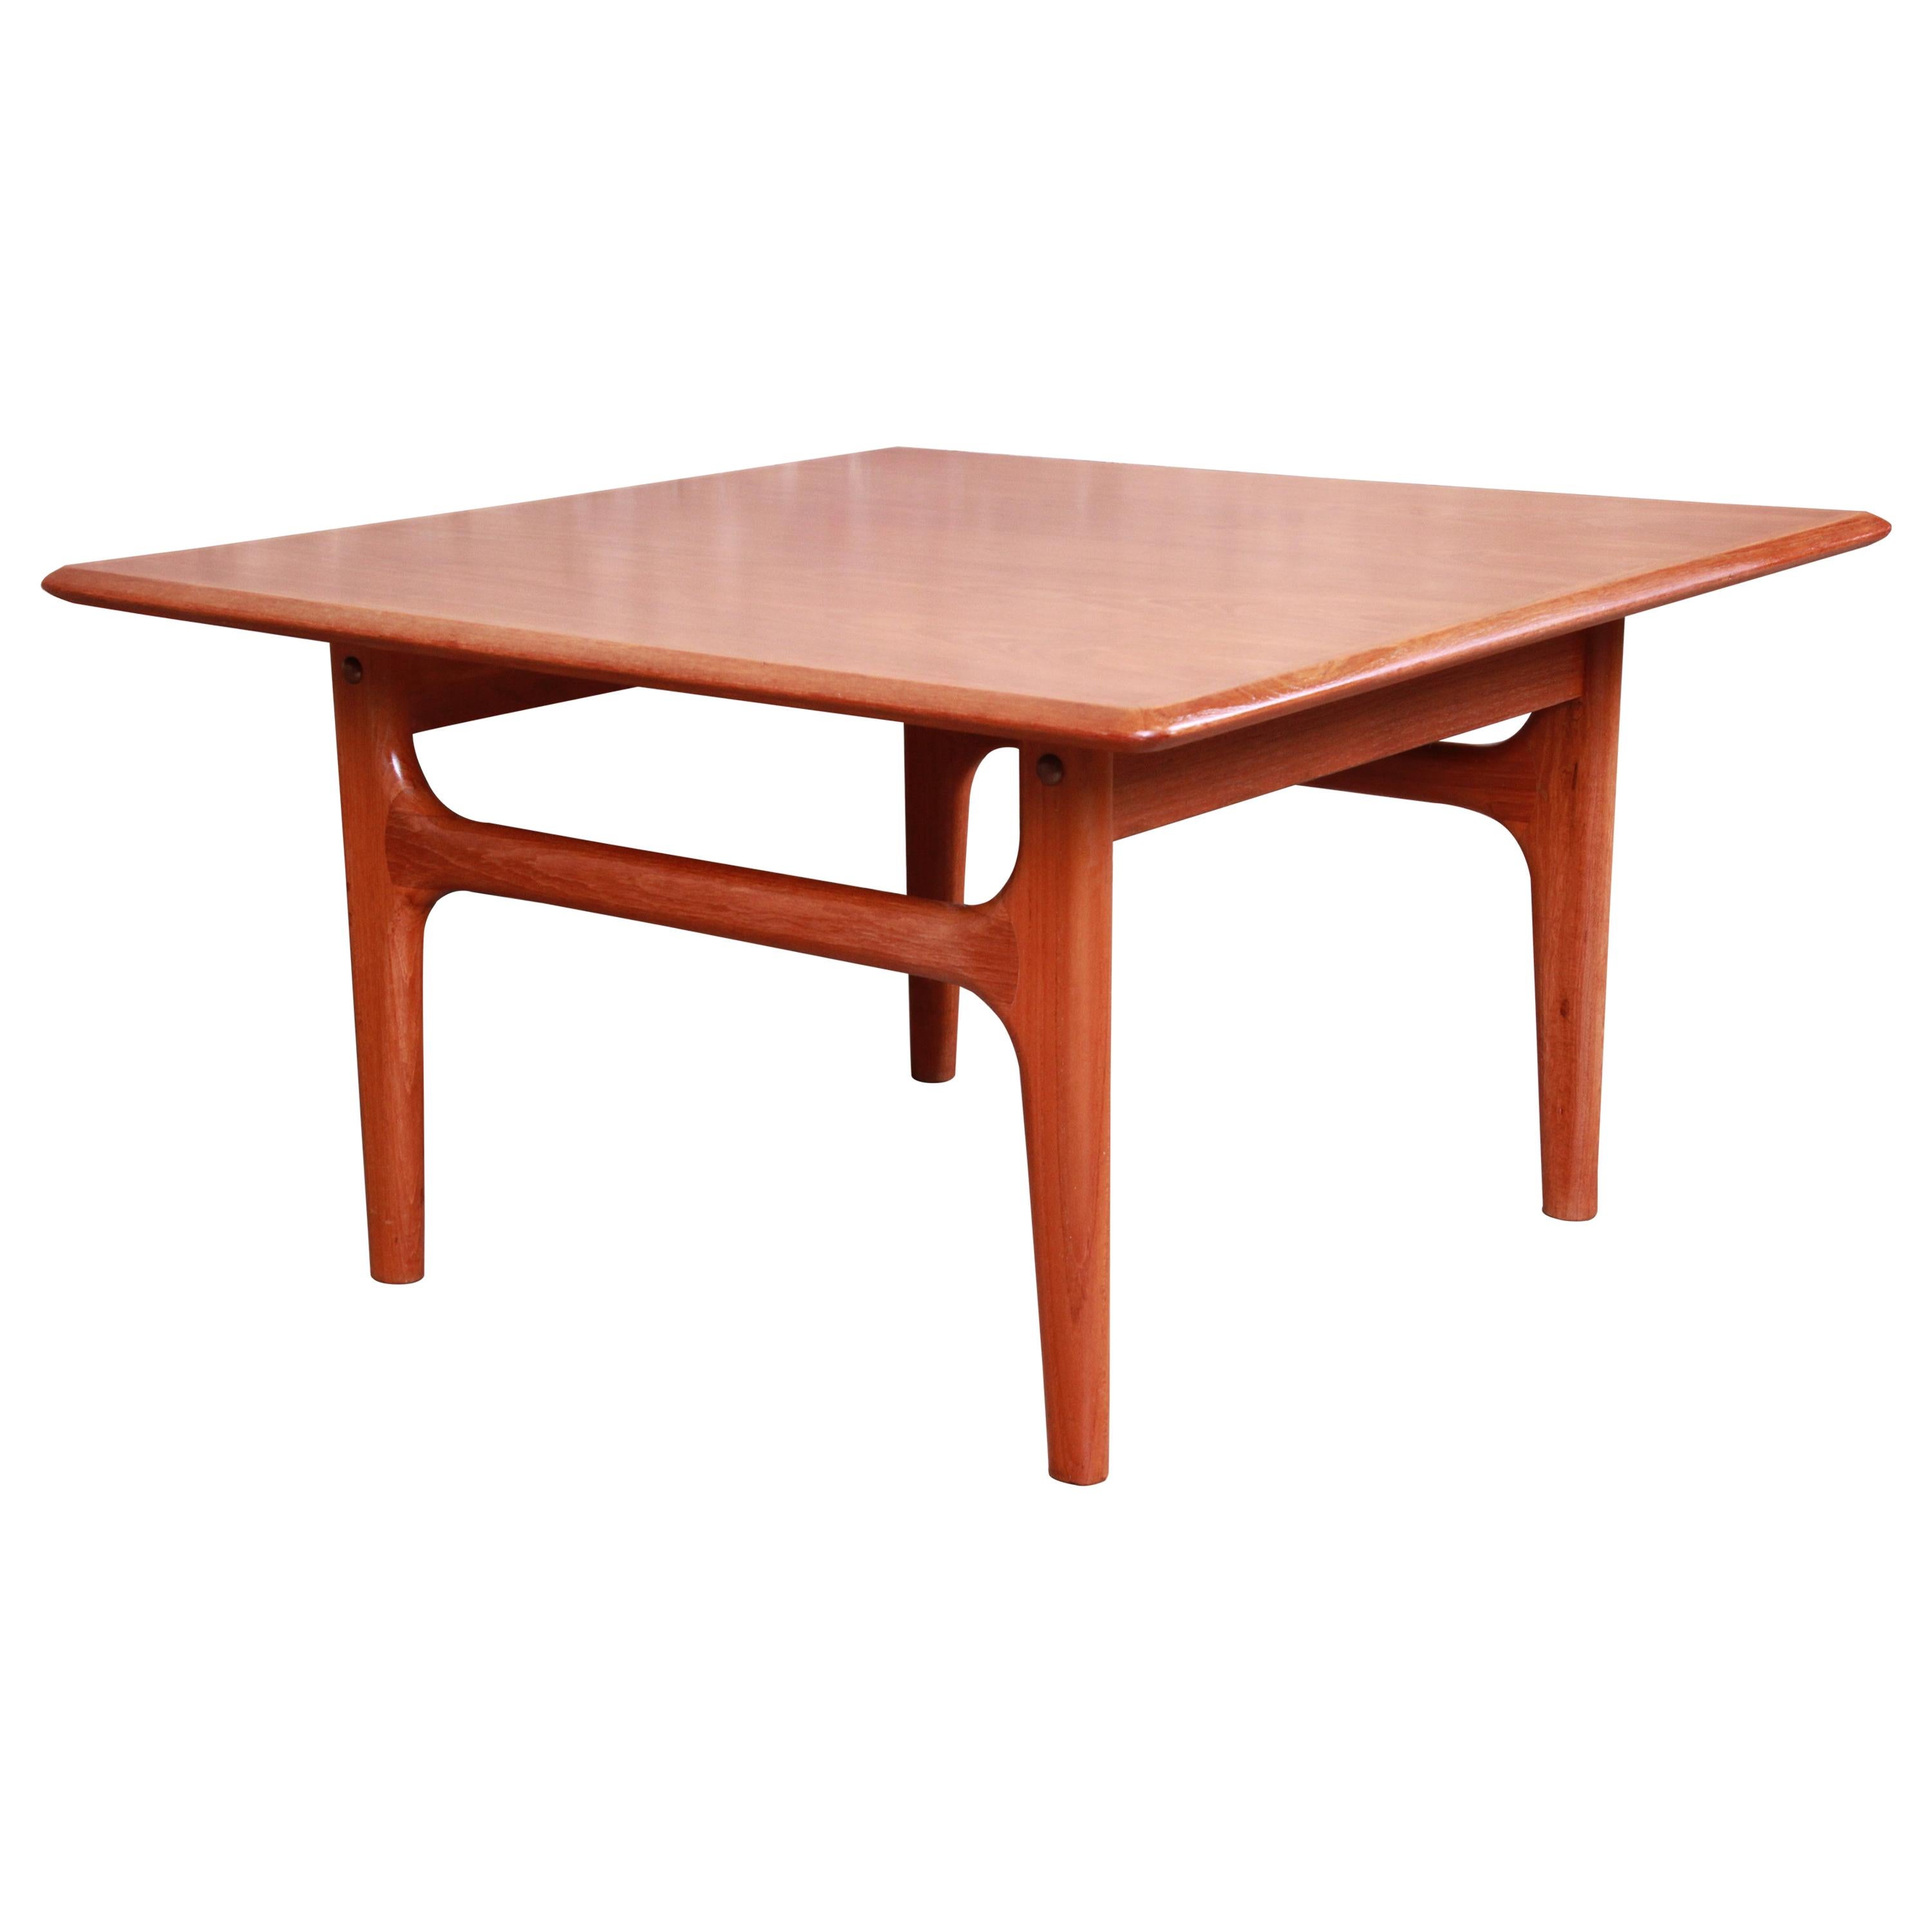 Danish Modern Sculpted Teak Occasional Side Table by Trioh, circa 1960s